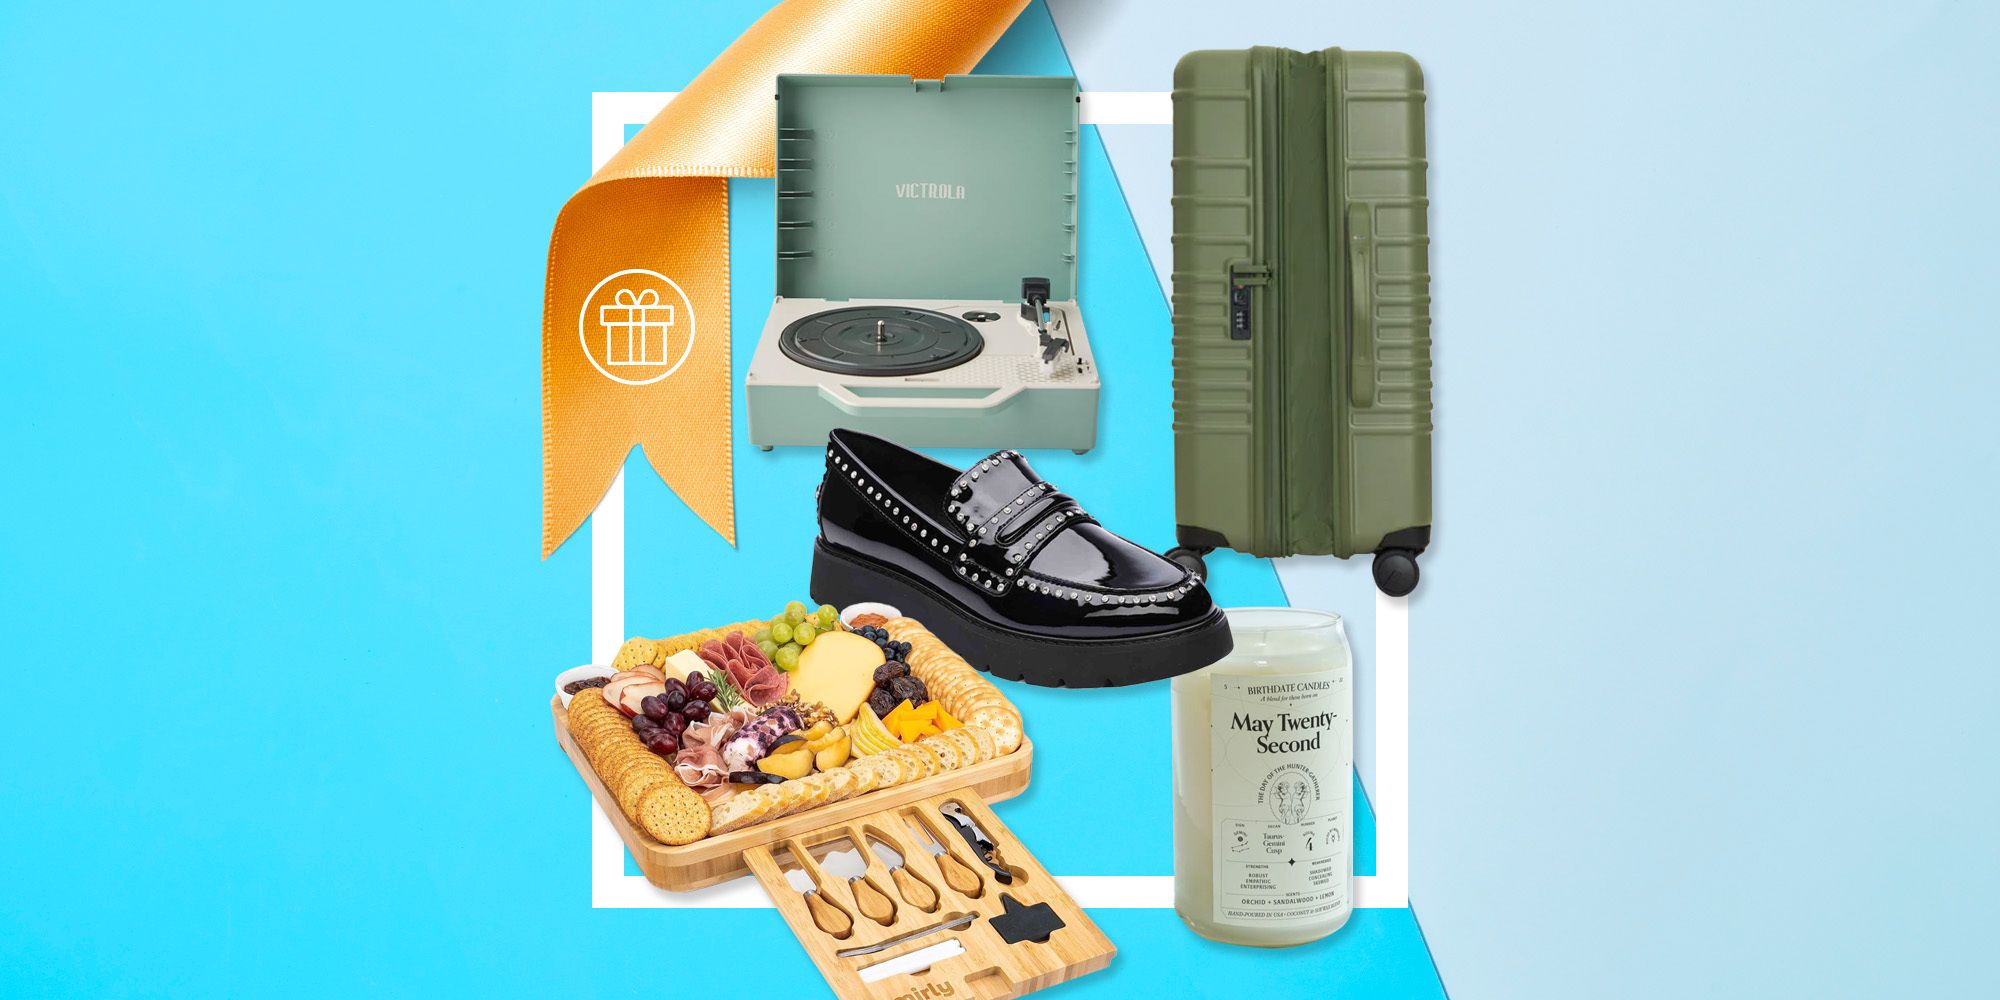 We Asked and These are The 25 Gifts Moms are Actually Asking for